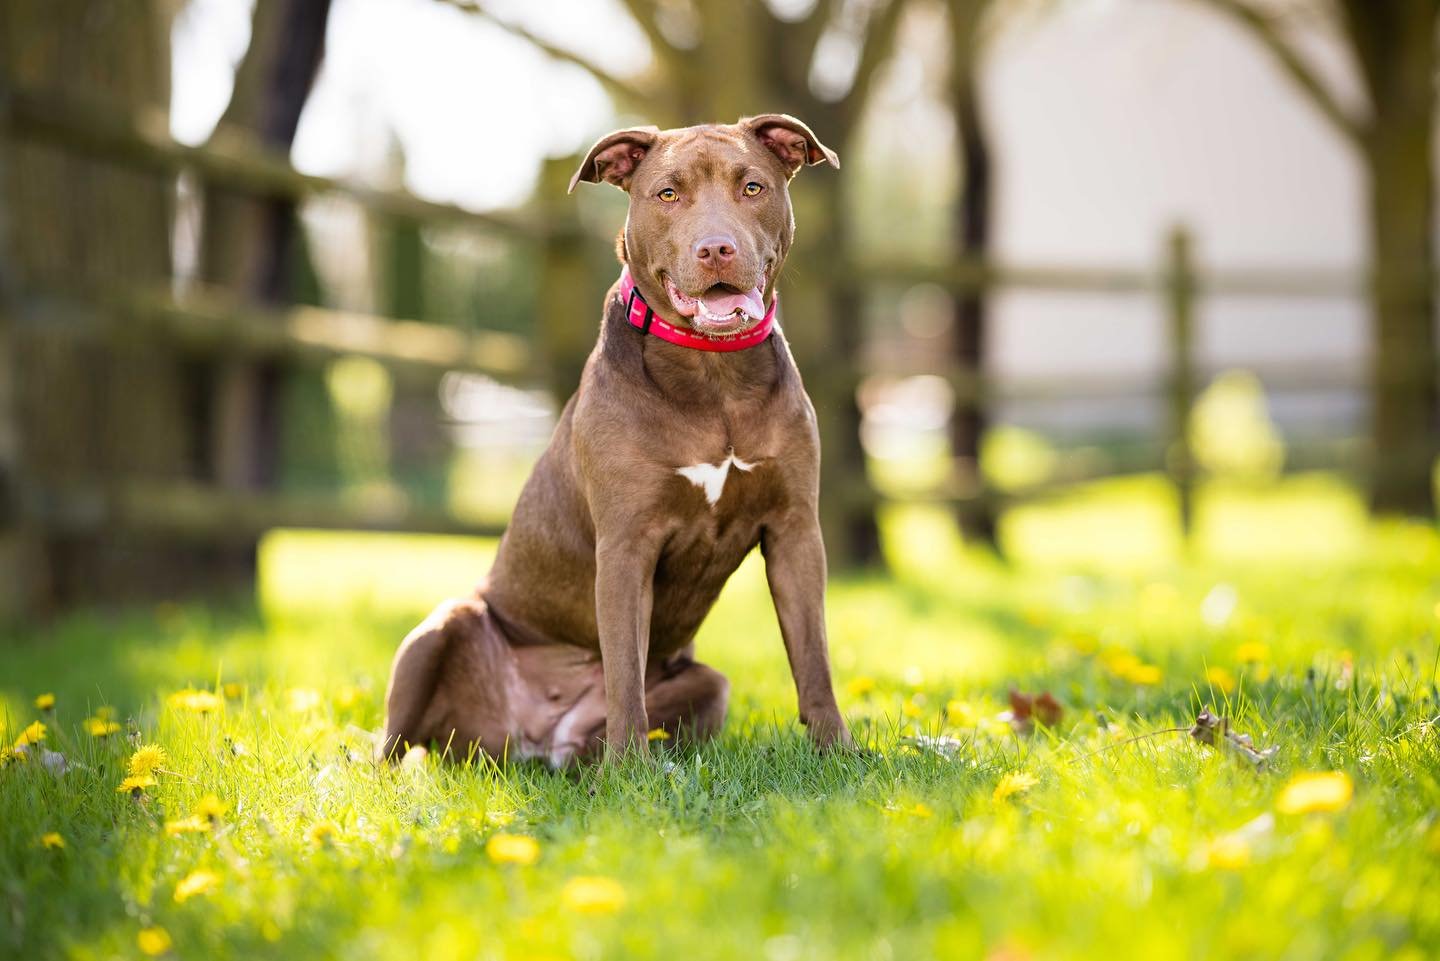 Guys&hellip;. Green season is officially here!

Also, Ruby Do needs a home and you can find her bio on the @plannedpethoodtoledo website. 

#dandelions #dandelionfield #springphotoshoot #pibblelove #pittiesofinstagram #rescuepups #adoptme #brownpitbu